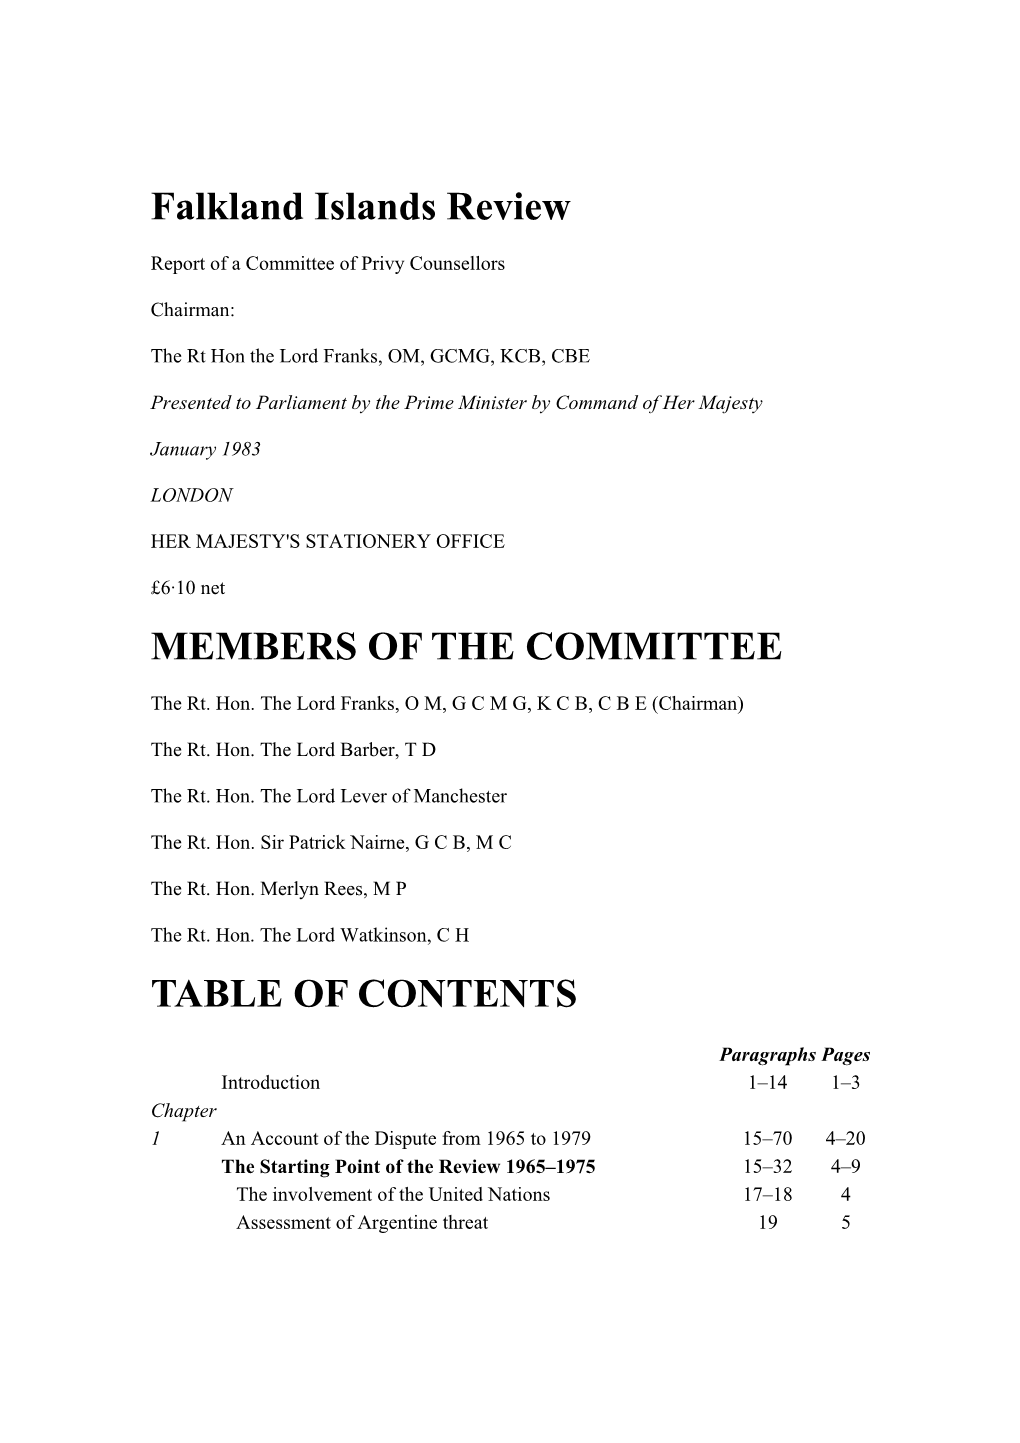 Falkland Islands Review MEMBERS of the COMMITTEE TABLE of CONTENTS